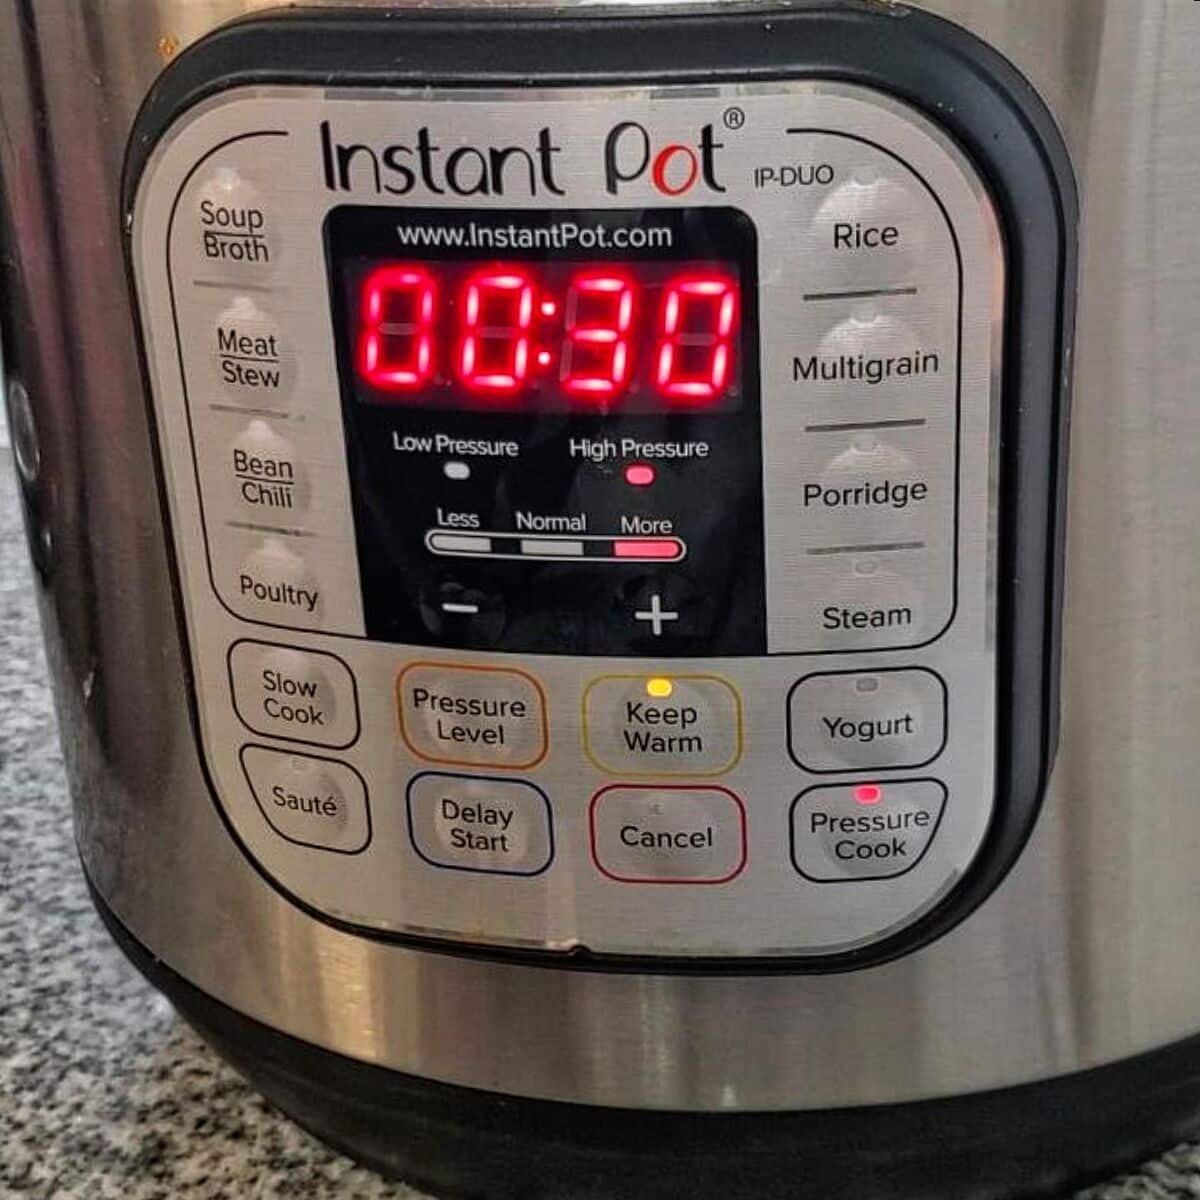 set the timer on the instant pot for 30 minutes at high pressure cooking.